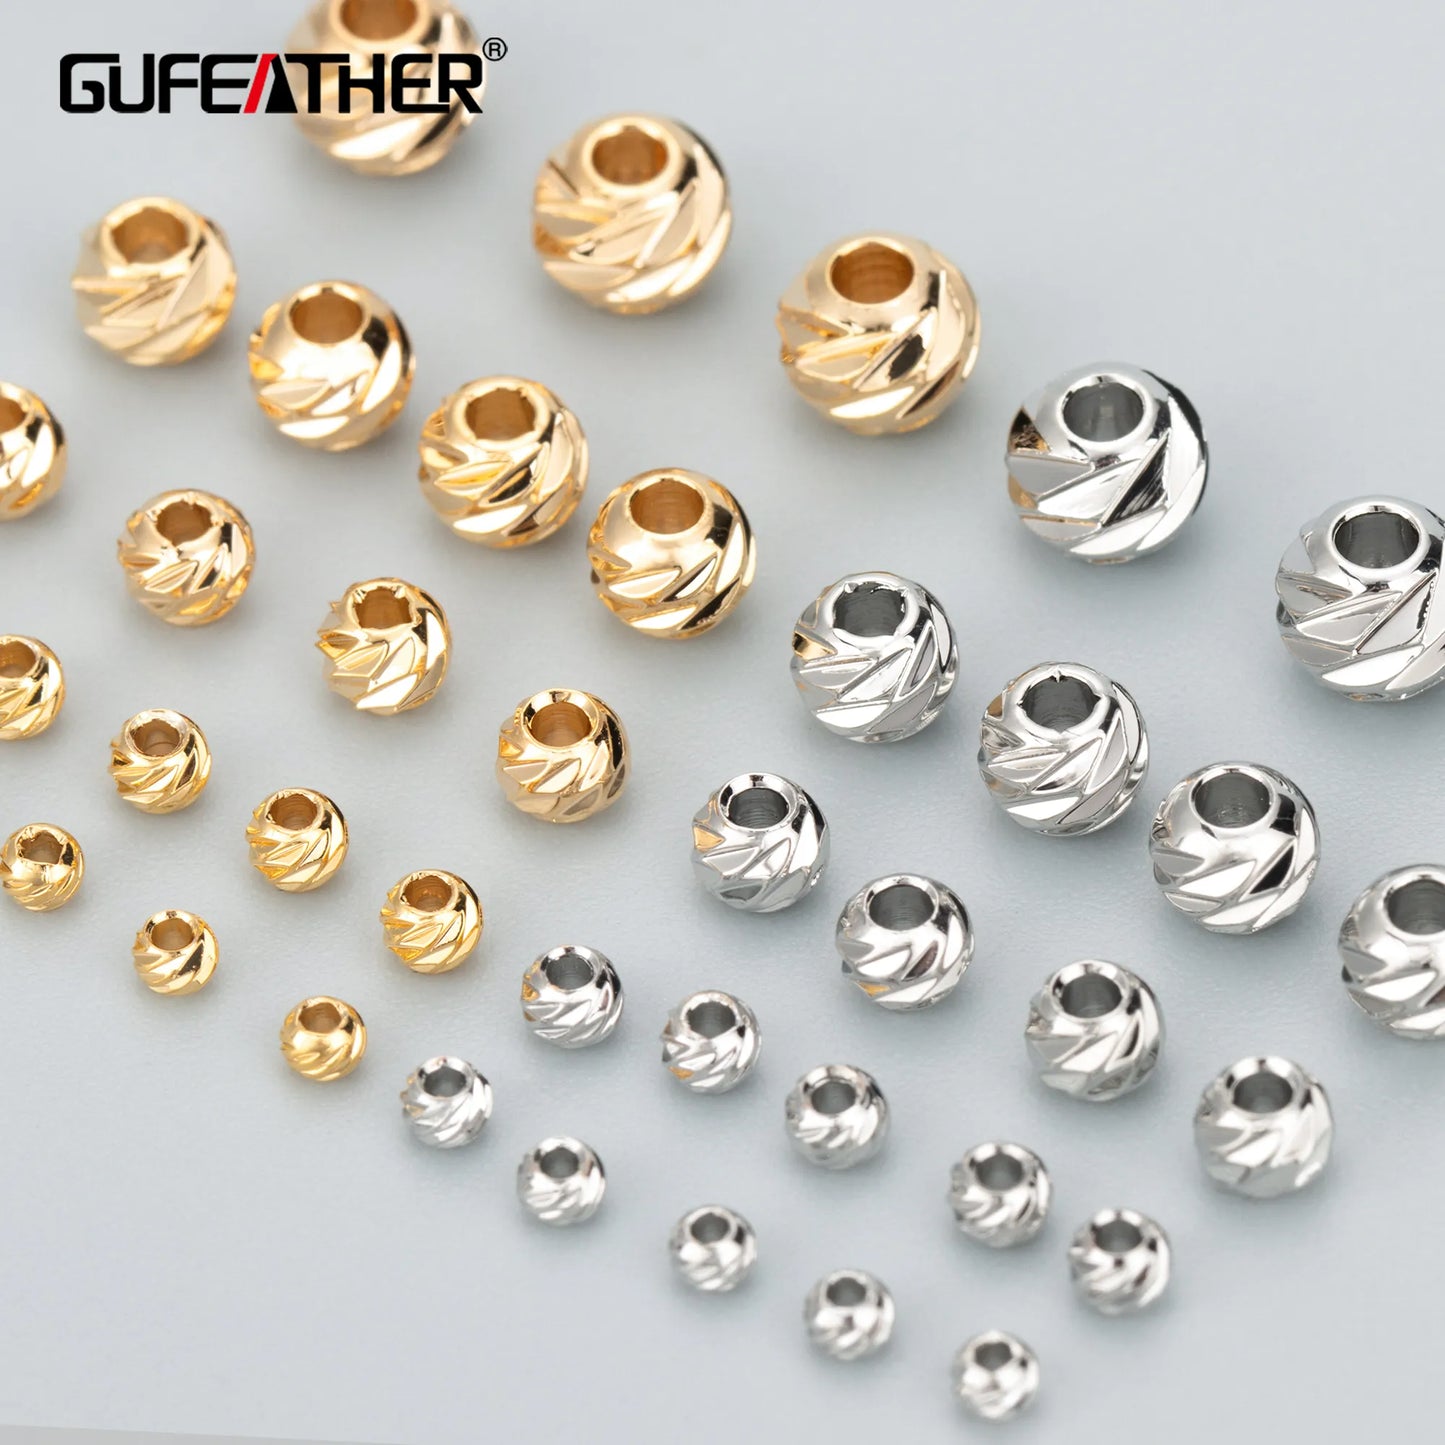 GUFEATHER MB89,jewelry accessories,18k gold rhodium plated,pass REACH,nickel free,copper beads,jewelry making findings,one pack